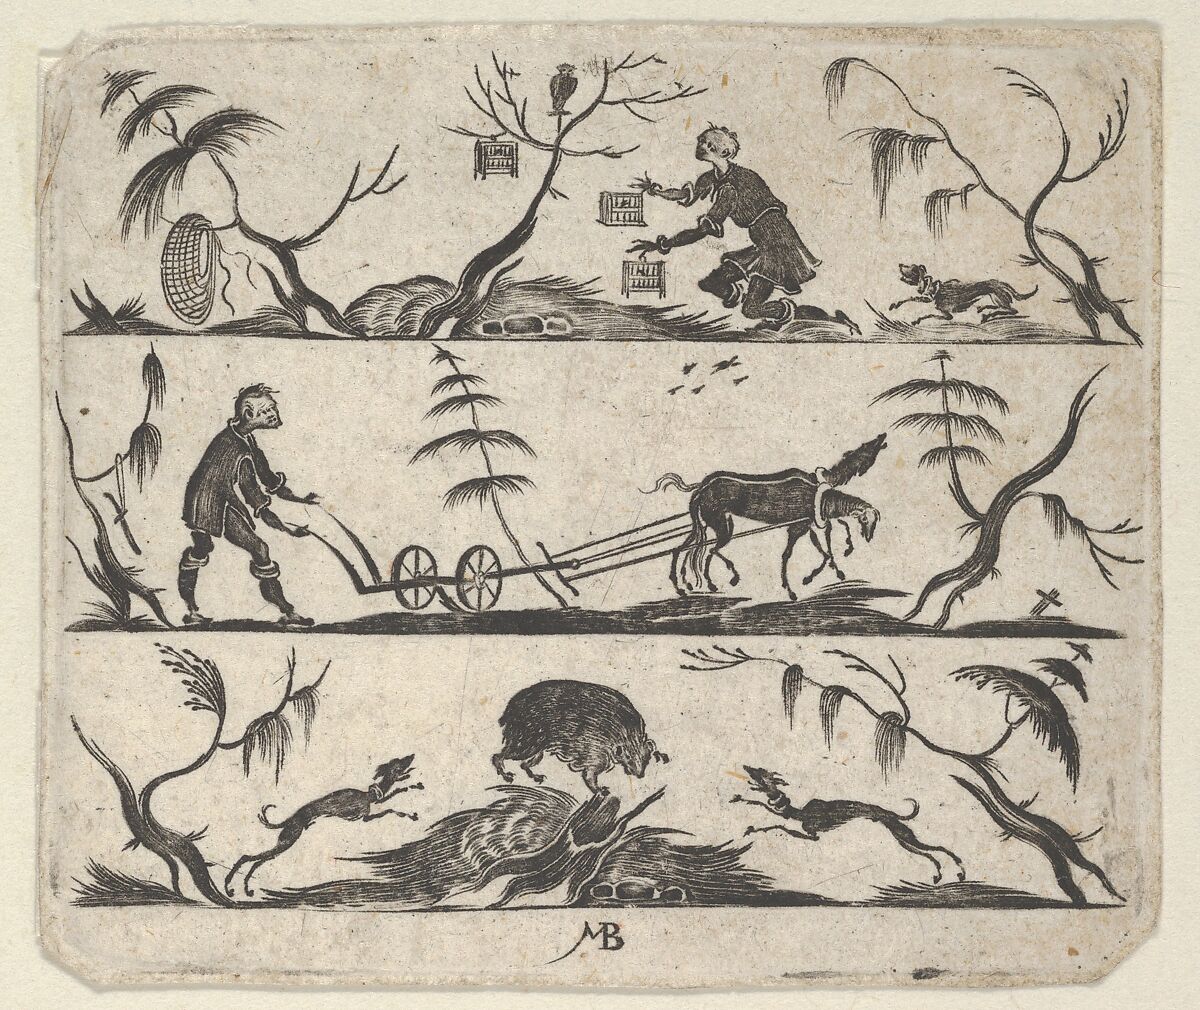 Blackwork Design for Goldsmithwork with a Bee-Keeper, a Farmer and a Boar, Mathais Beitler (German, Ansbach, active ca. 1582–1616), Engraving and blackwork 